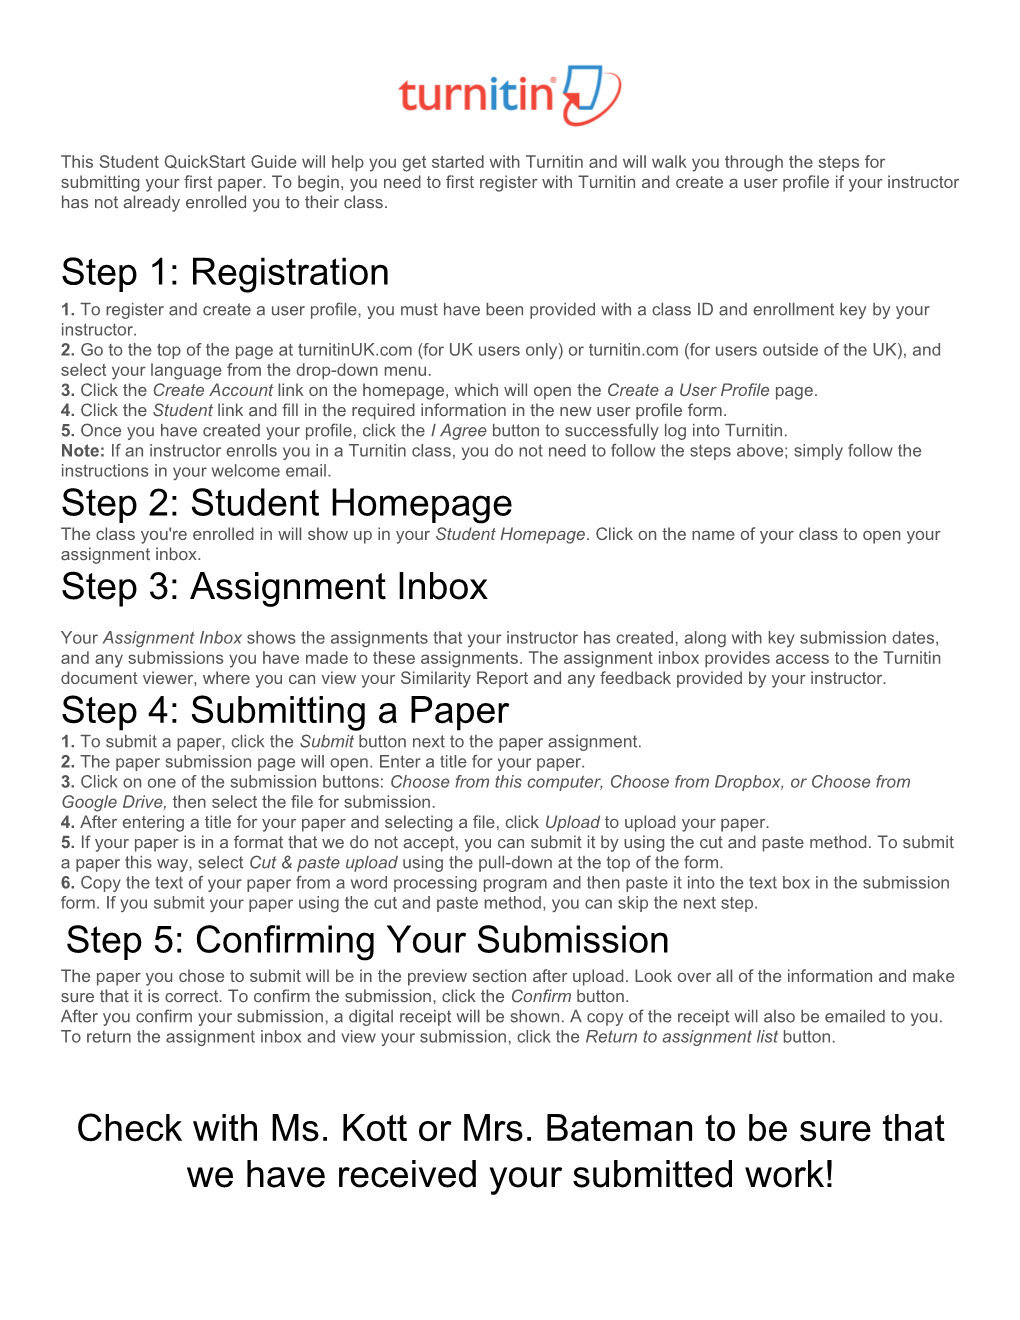 This Student Quickstartguide Will Help You Get Started with Turnitin and Will Walk You